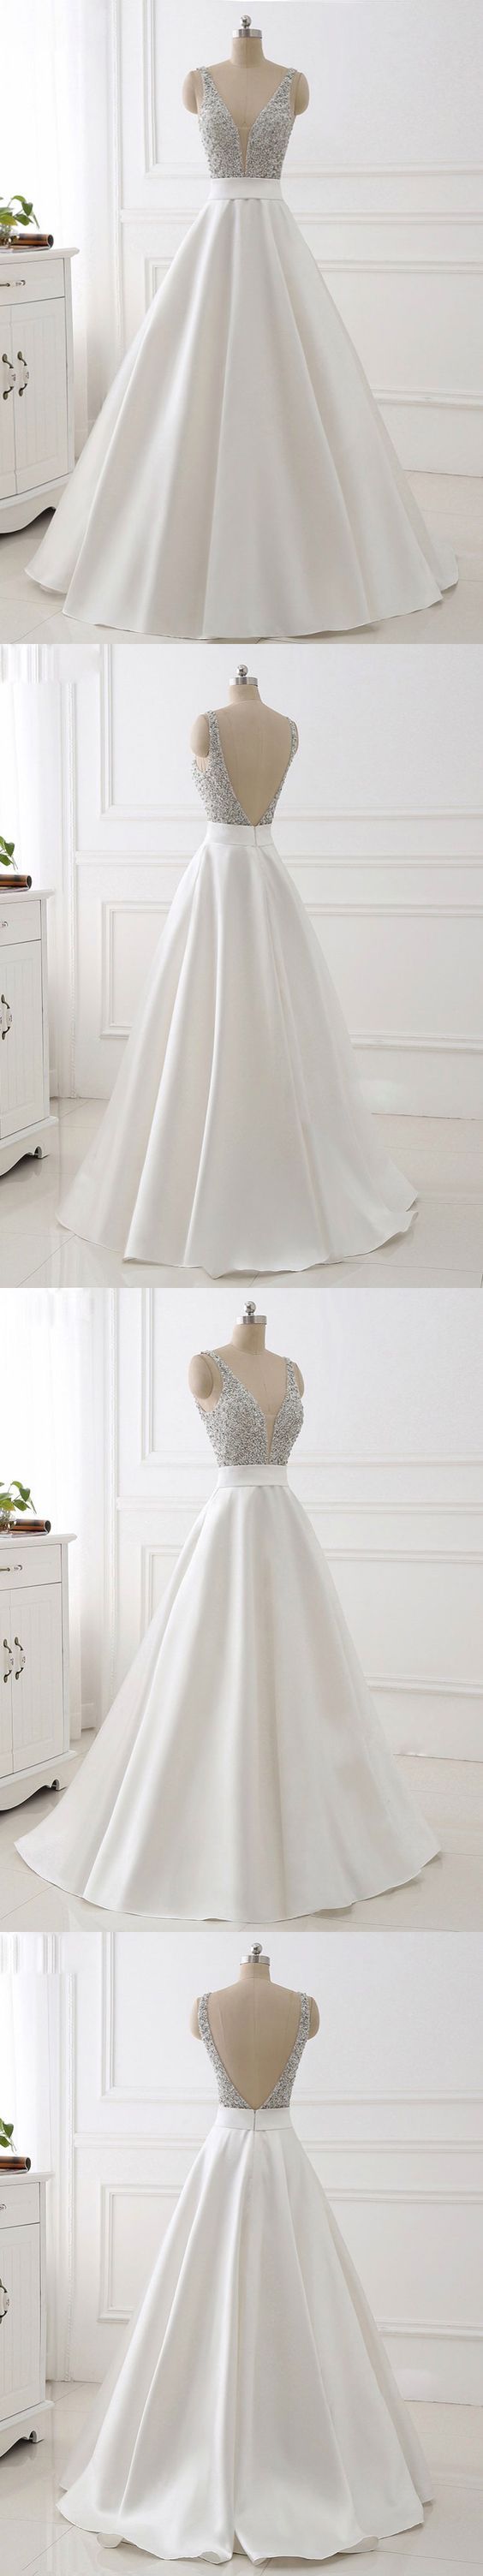 Charming White Prom Dress,deep V-neck Sexy Long Party Dress,sexy V-back Evening Gown,formal Dress